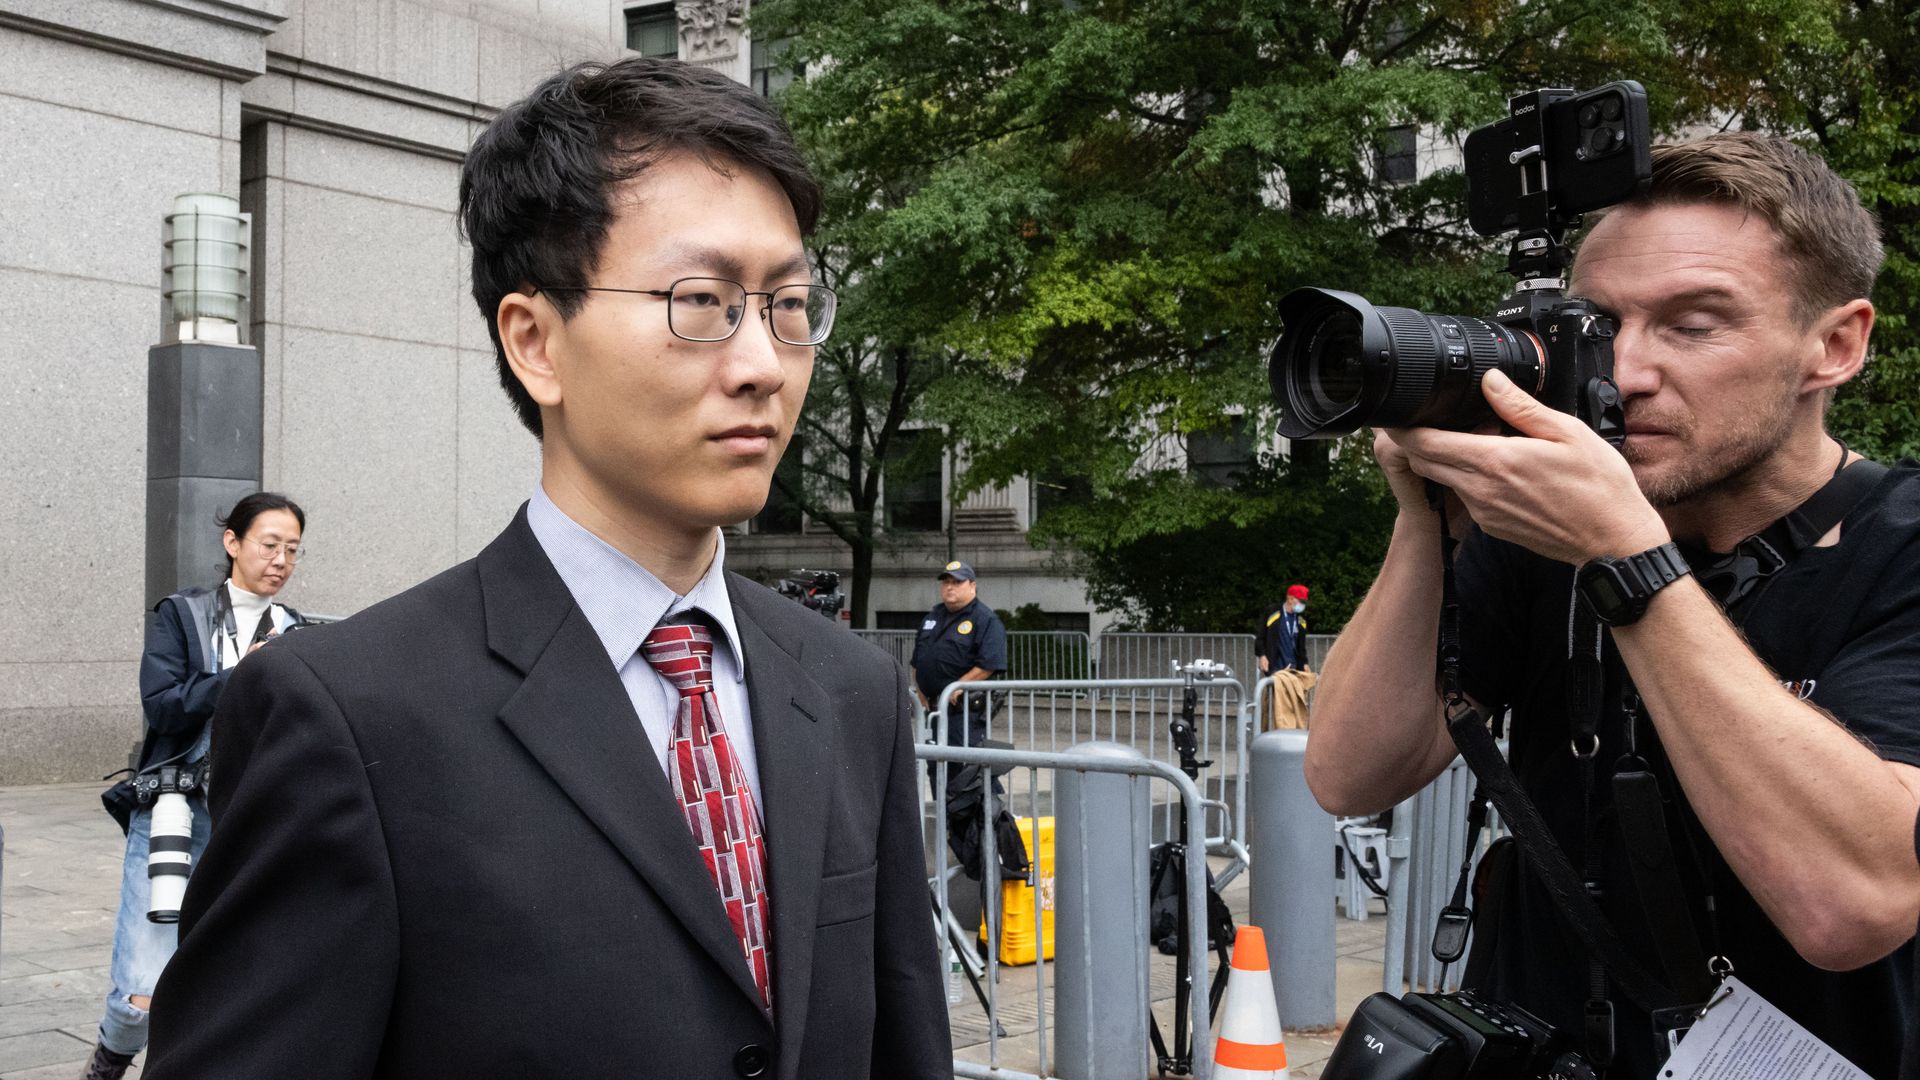 A man in a suit walks past a camera inches from his face, outside a courtroom